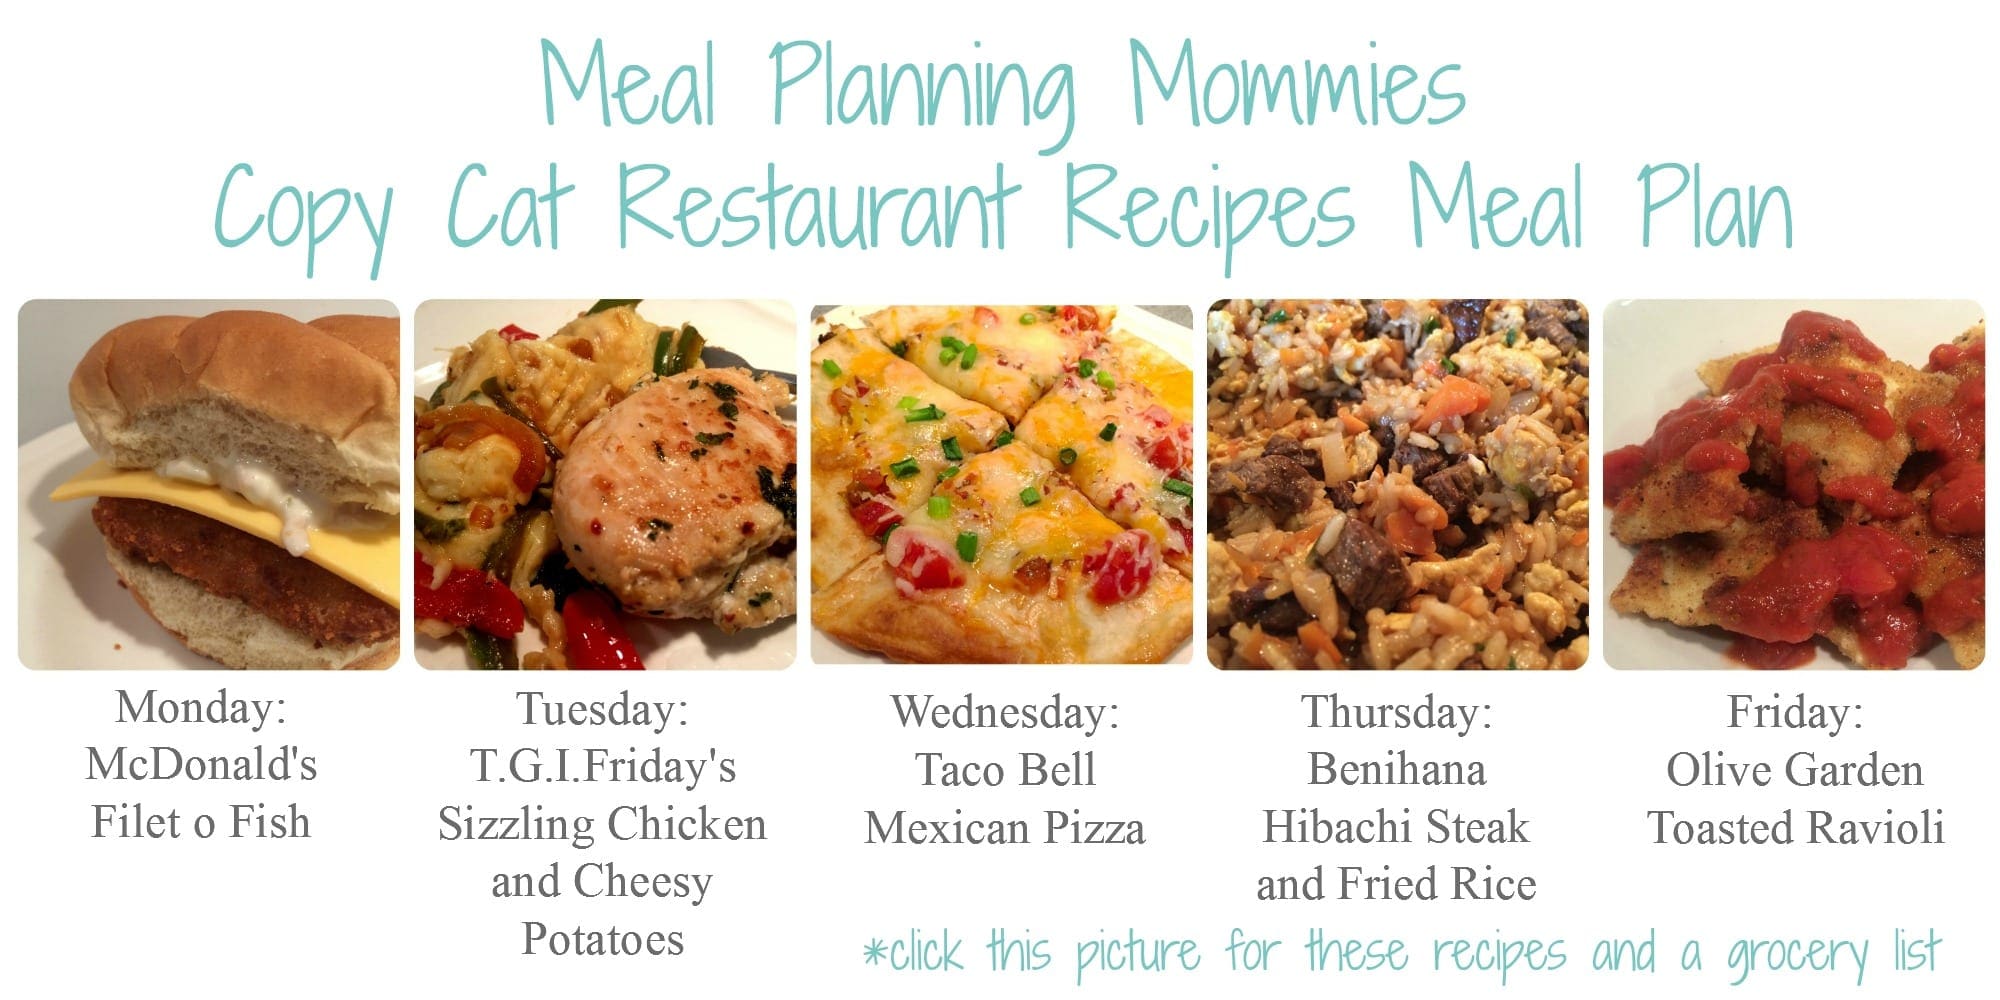 Restaurant Recipes Meal Plan Link page